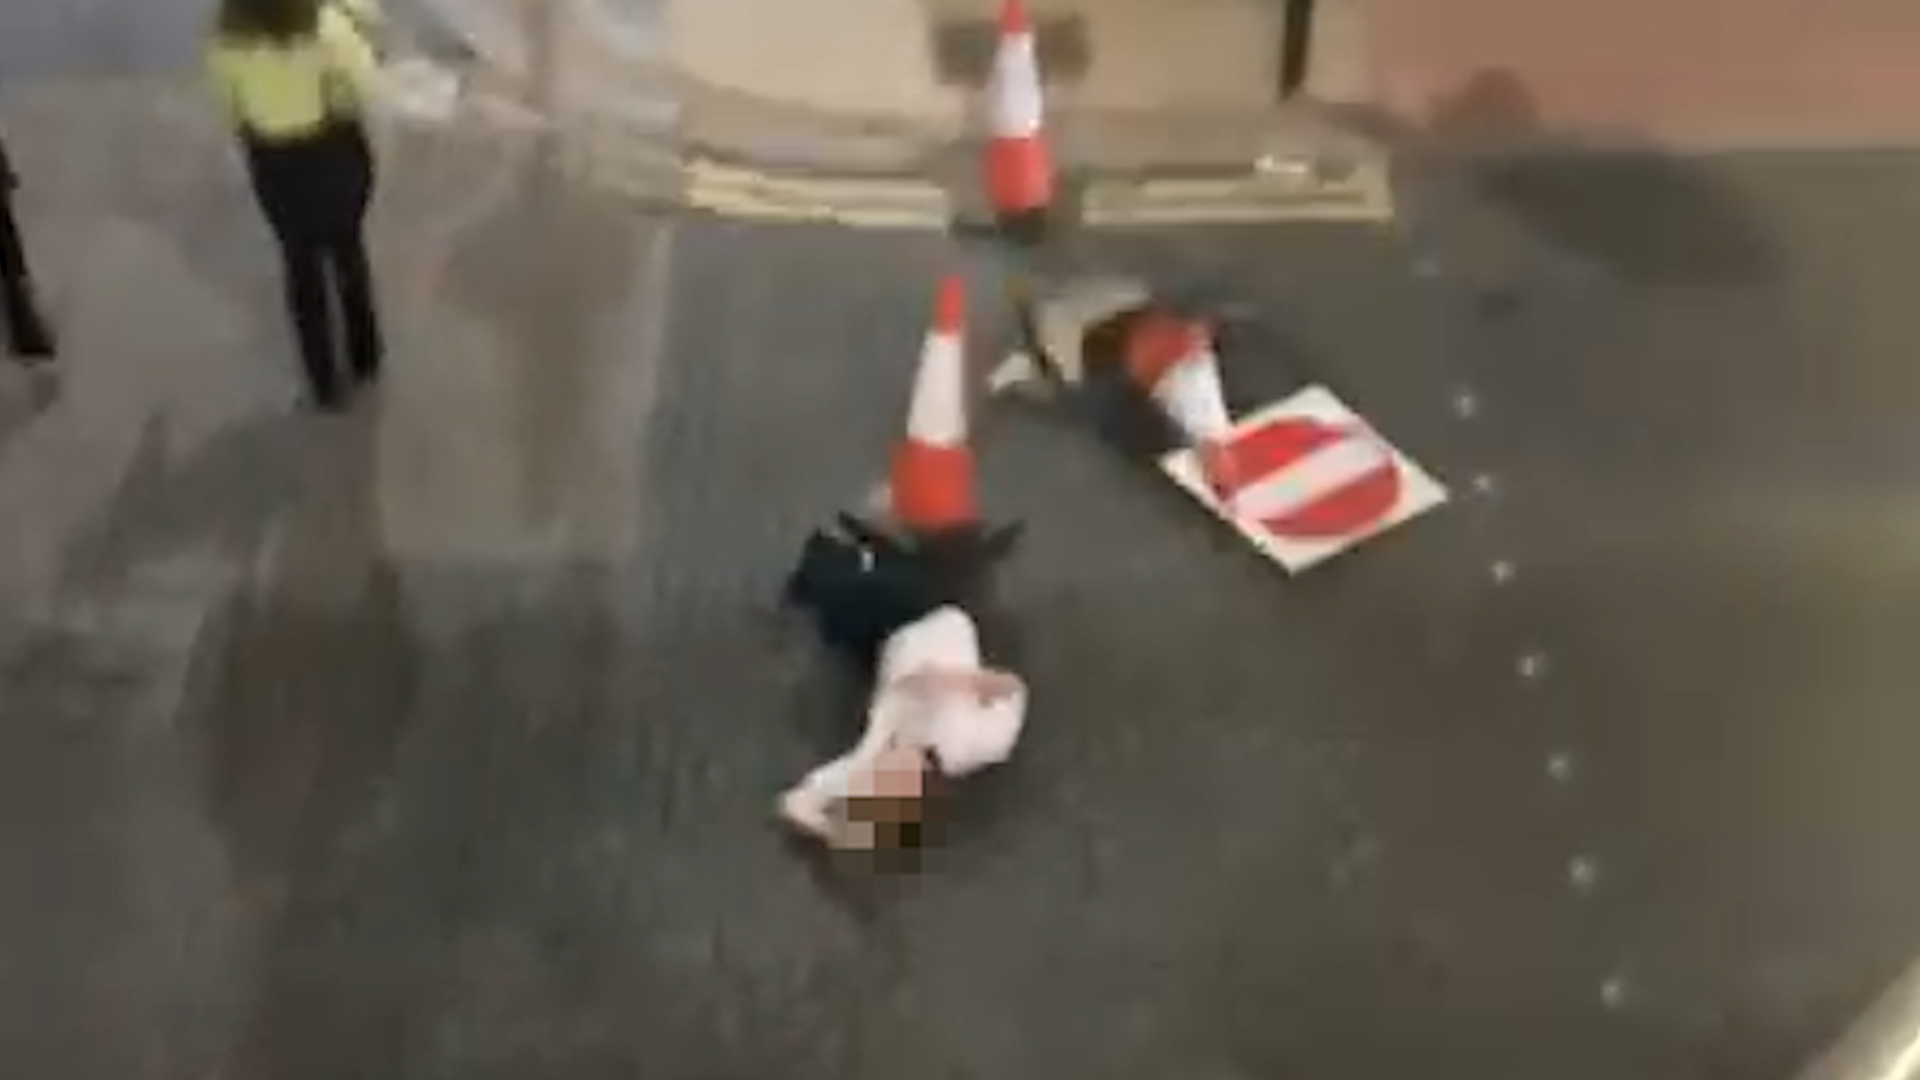 She says drunk people 'can't resist a traffic cone'